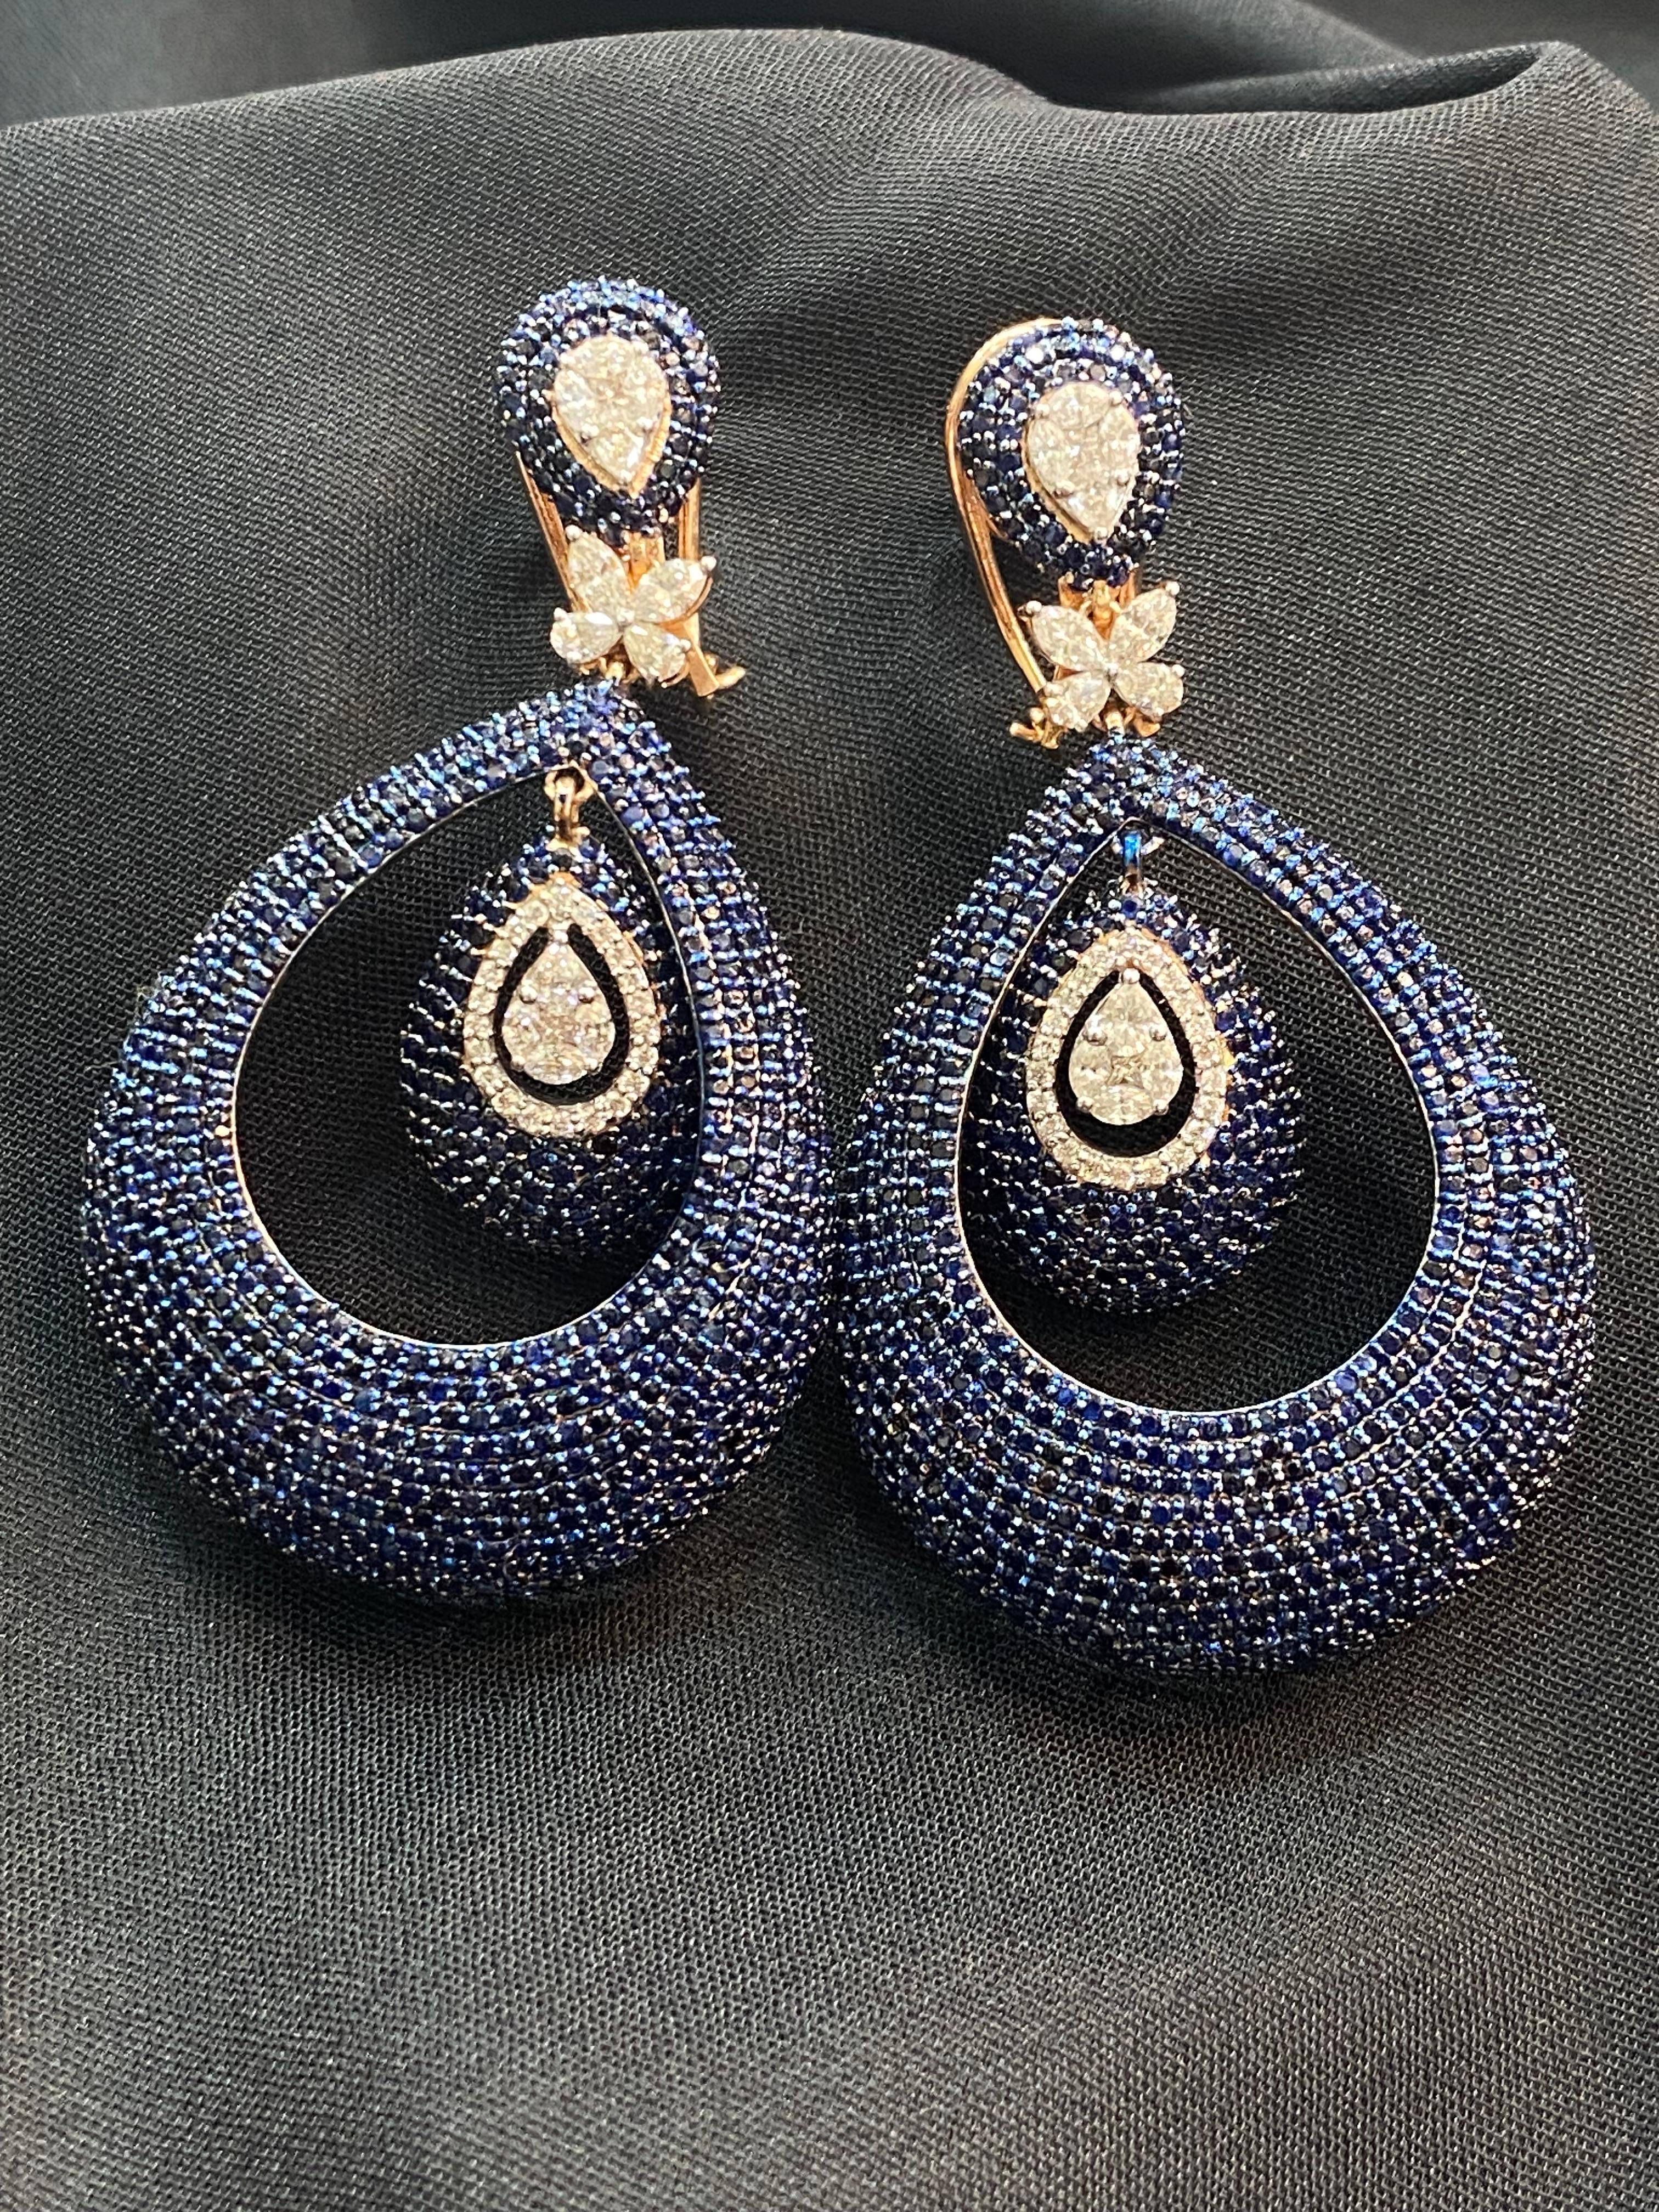 Stunning 20.30Cts Natural Blue Sapphire Marquise Pear Diamonds Earrings 14K Gold In New Condition For Sale In Massafra, IT